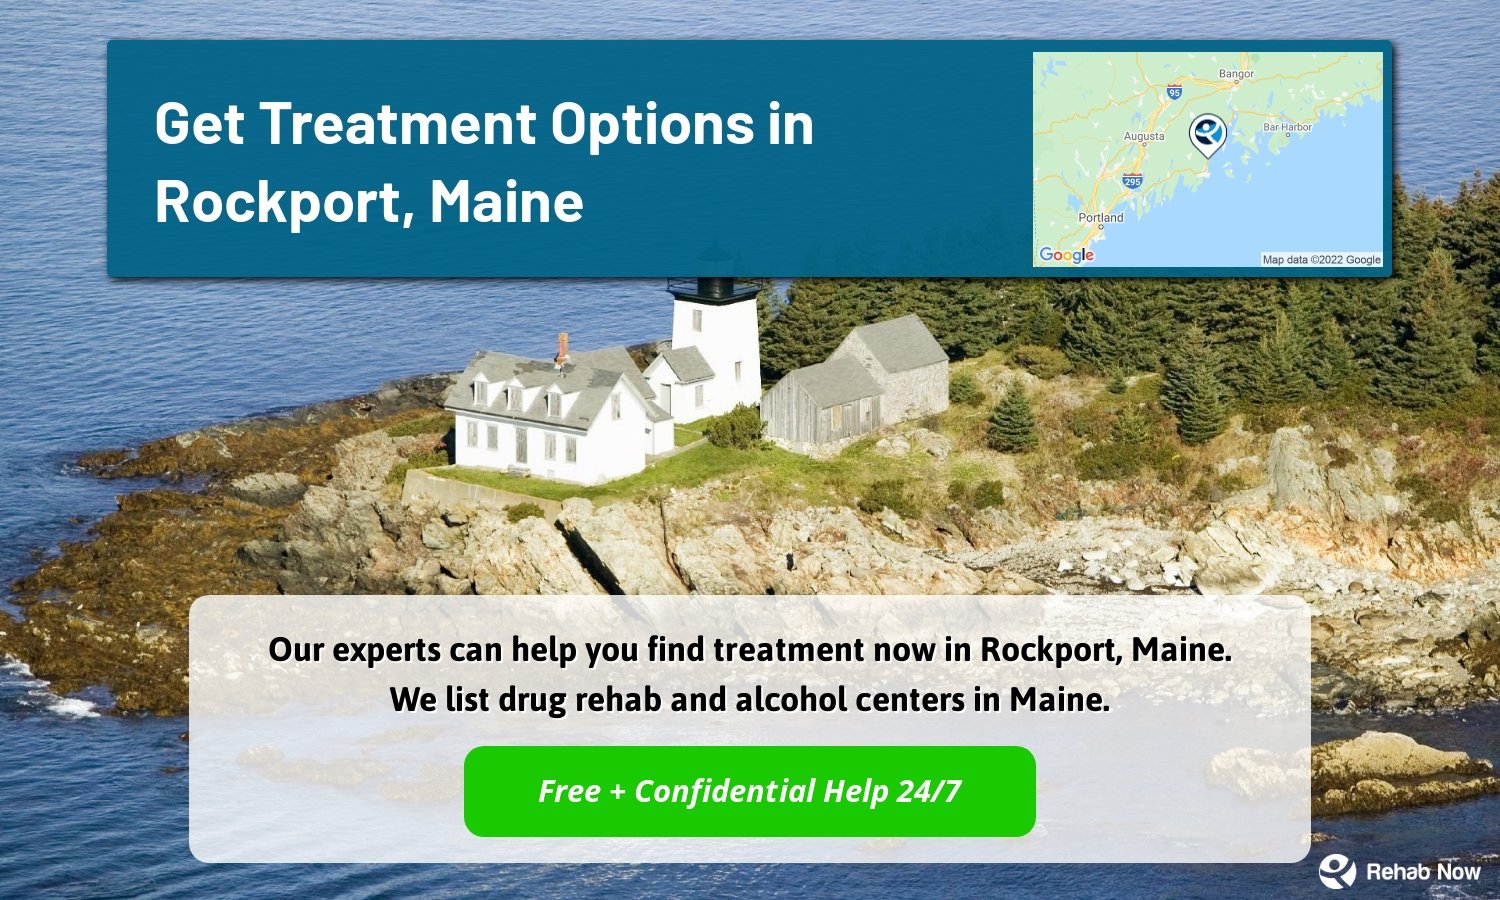 Our experts can help you find treatment now in Rockport, Maine. We list drug rehab and alcohol centers in Maine.